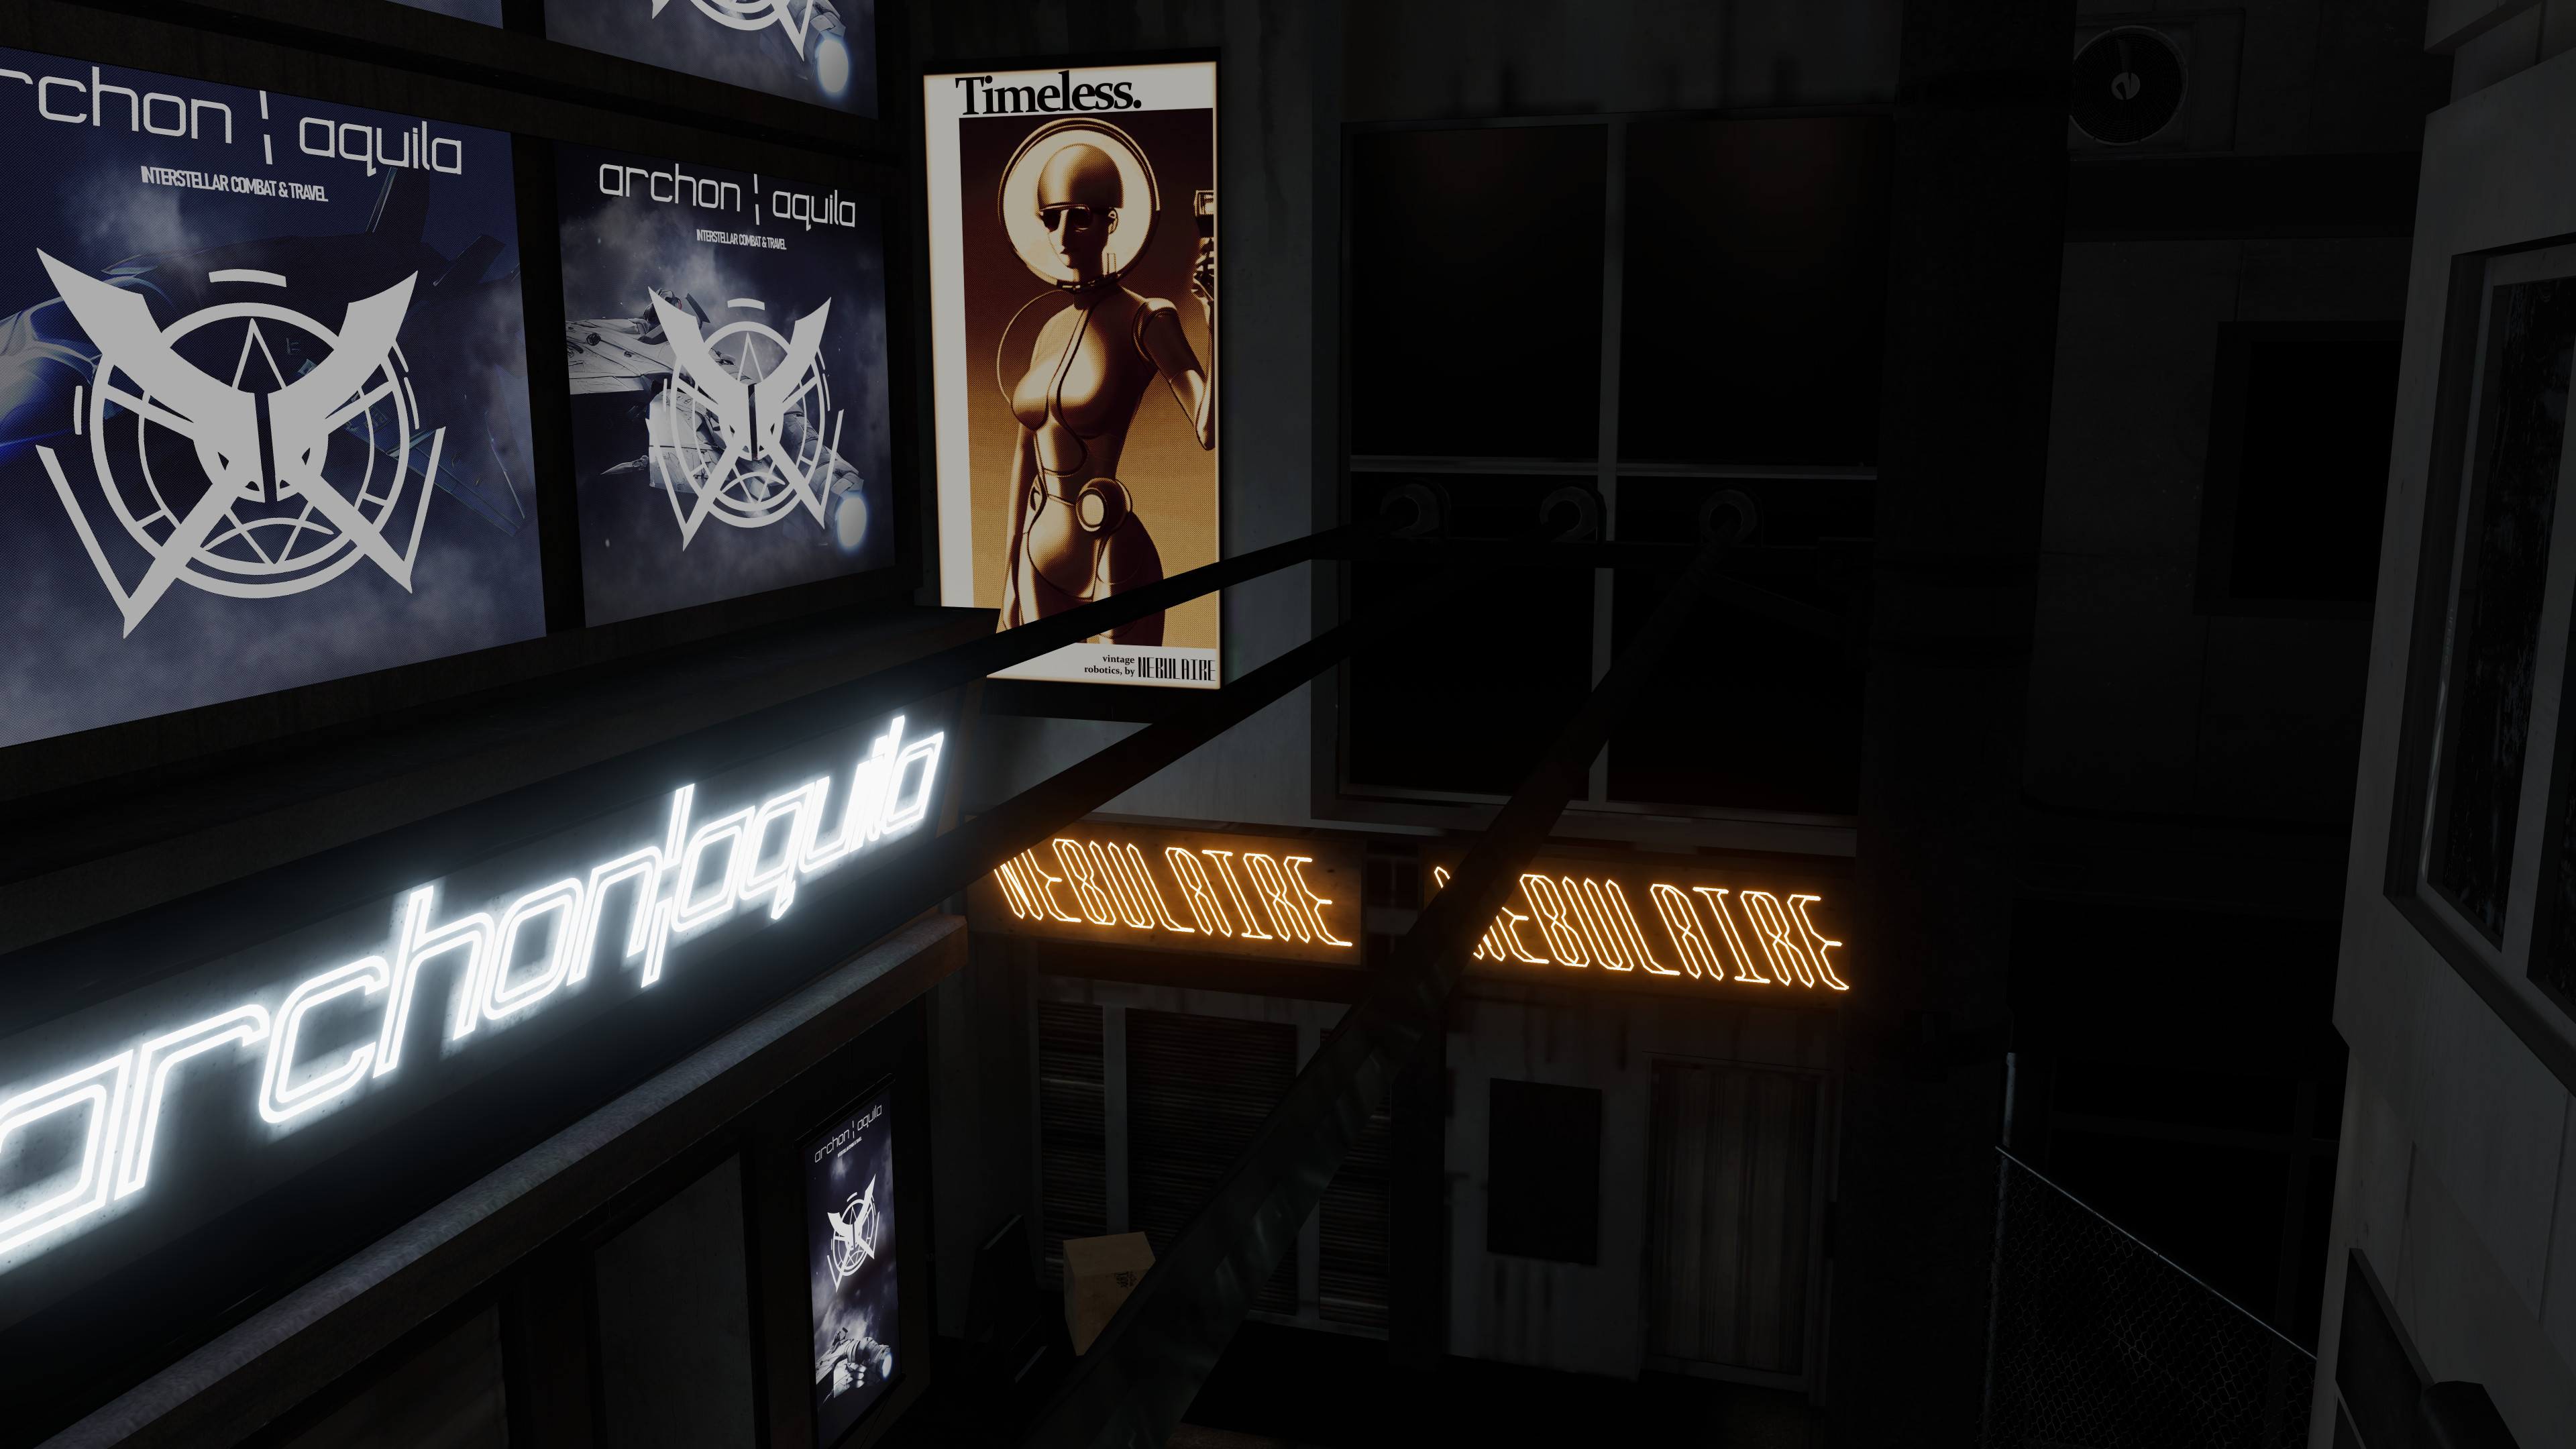 Psuedo storefront in environment. The LEDs / neon signs are font &gt; mesh, processed in Blender - simple emission shader for performance. 